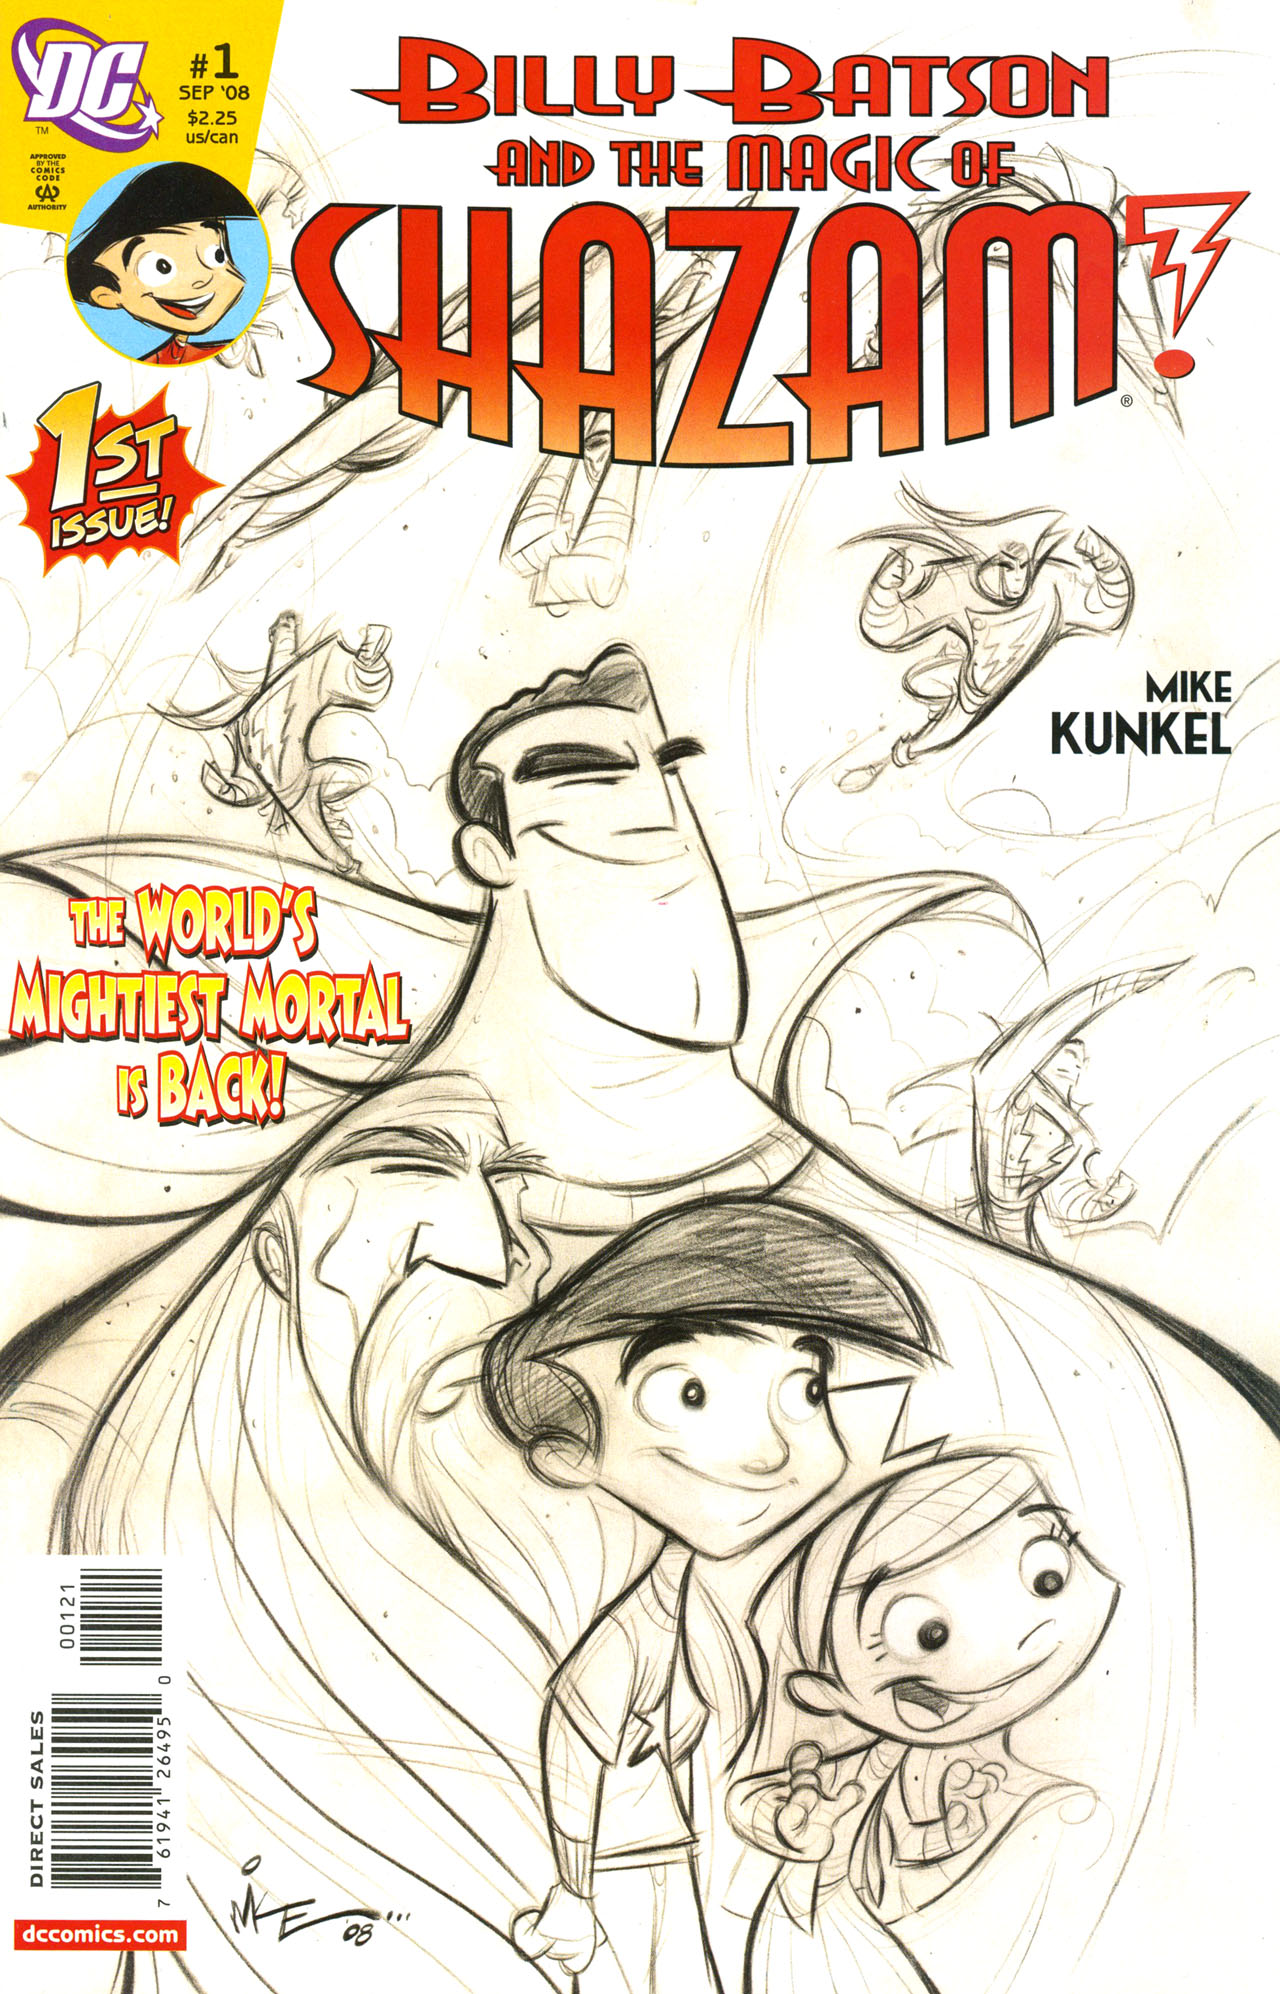 Read online Billy Batson & The Magic of Shazam! comic -  Issue #1 - 2